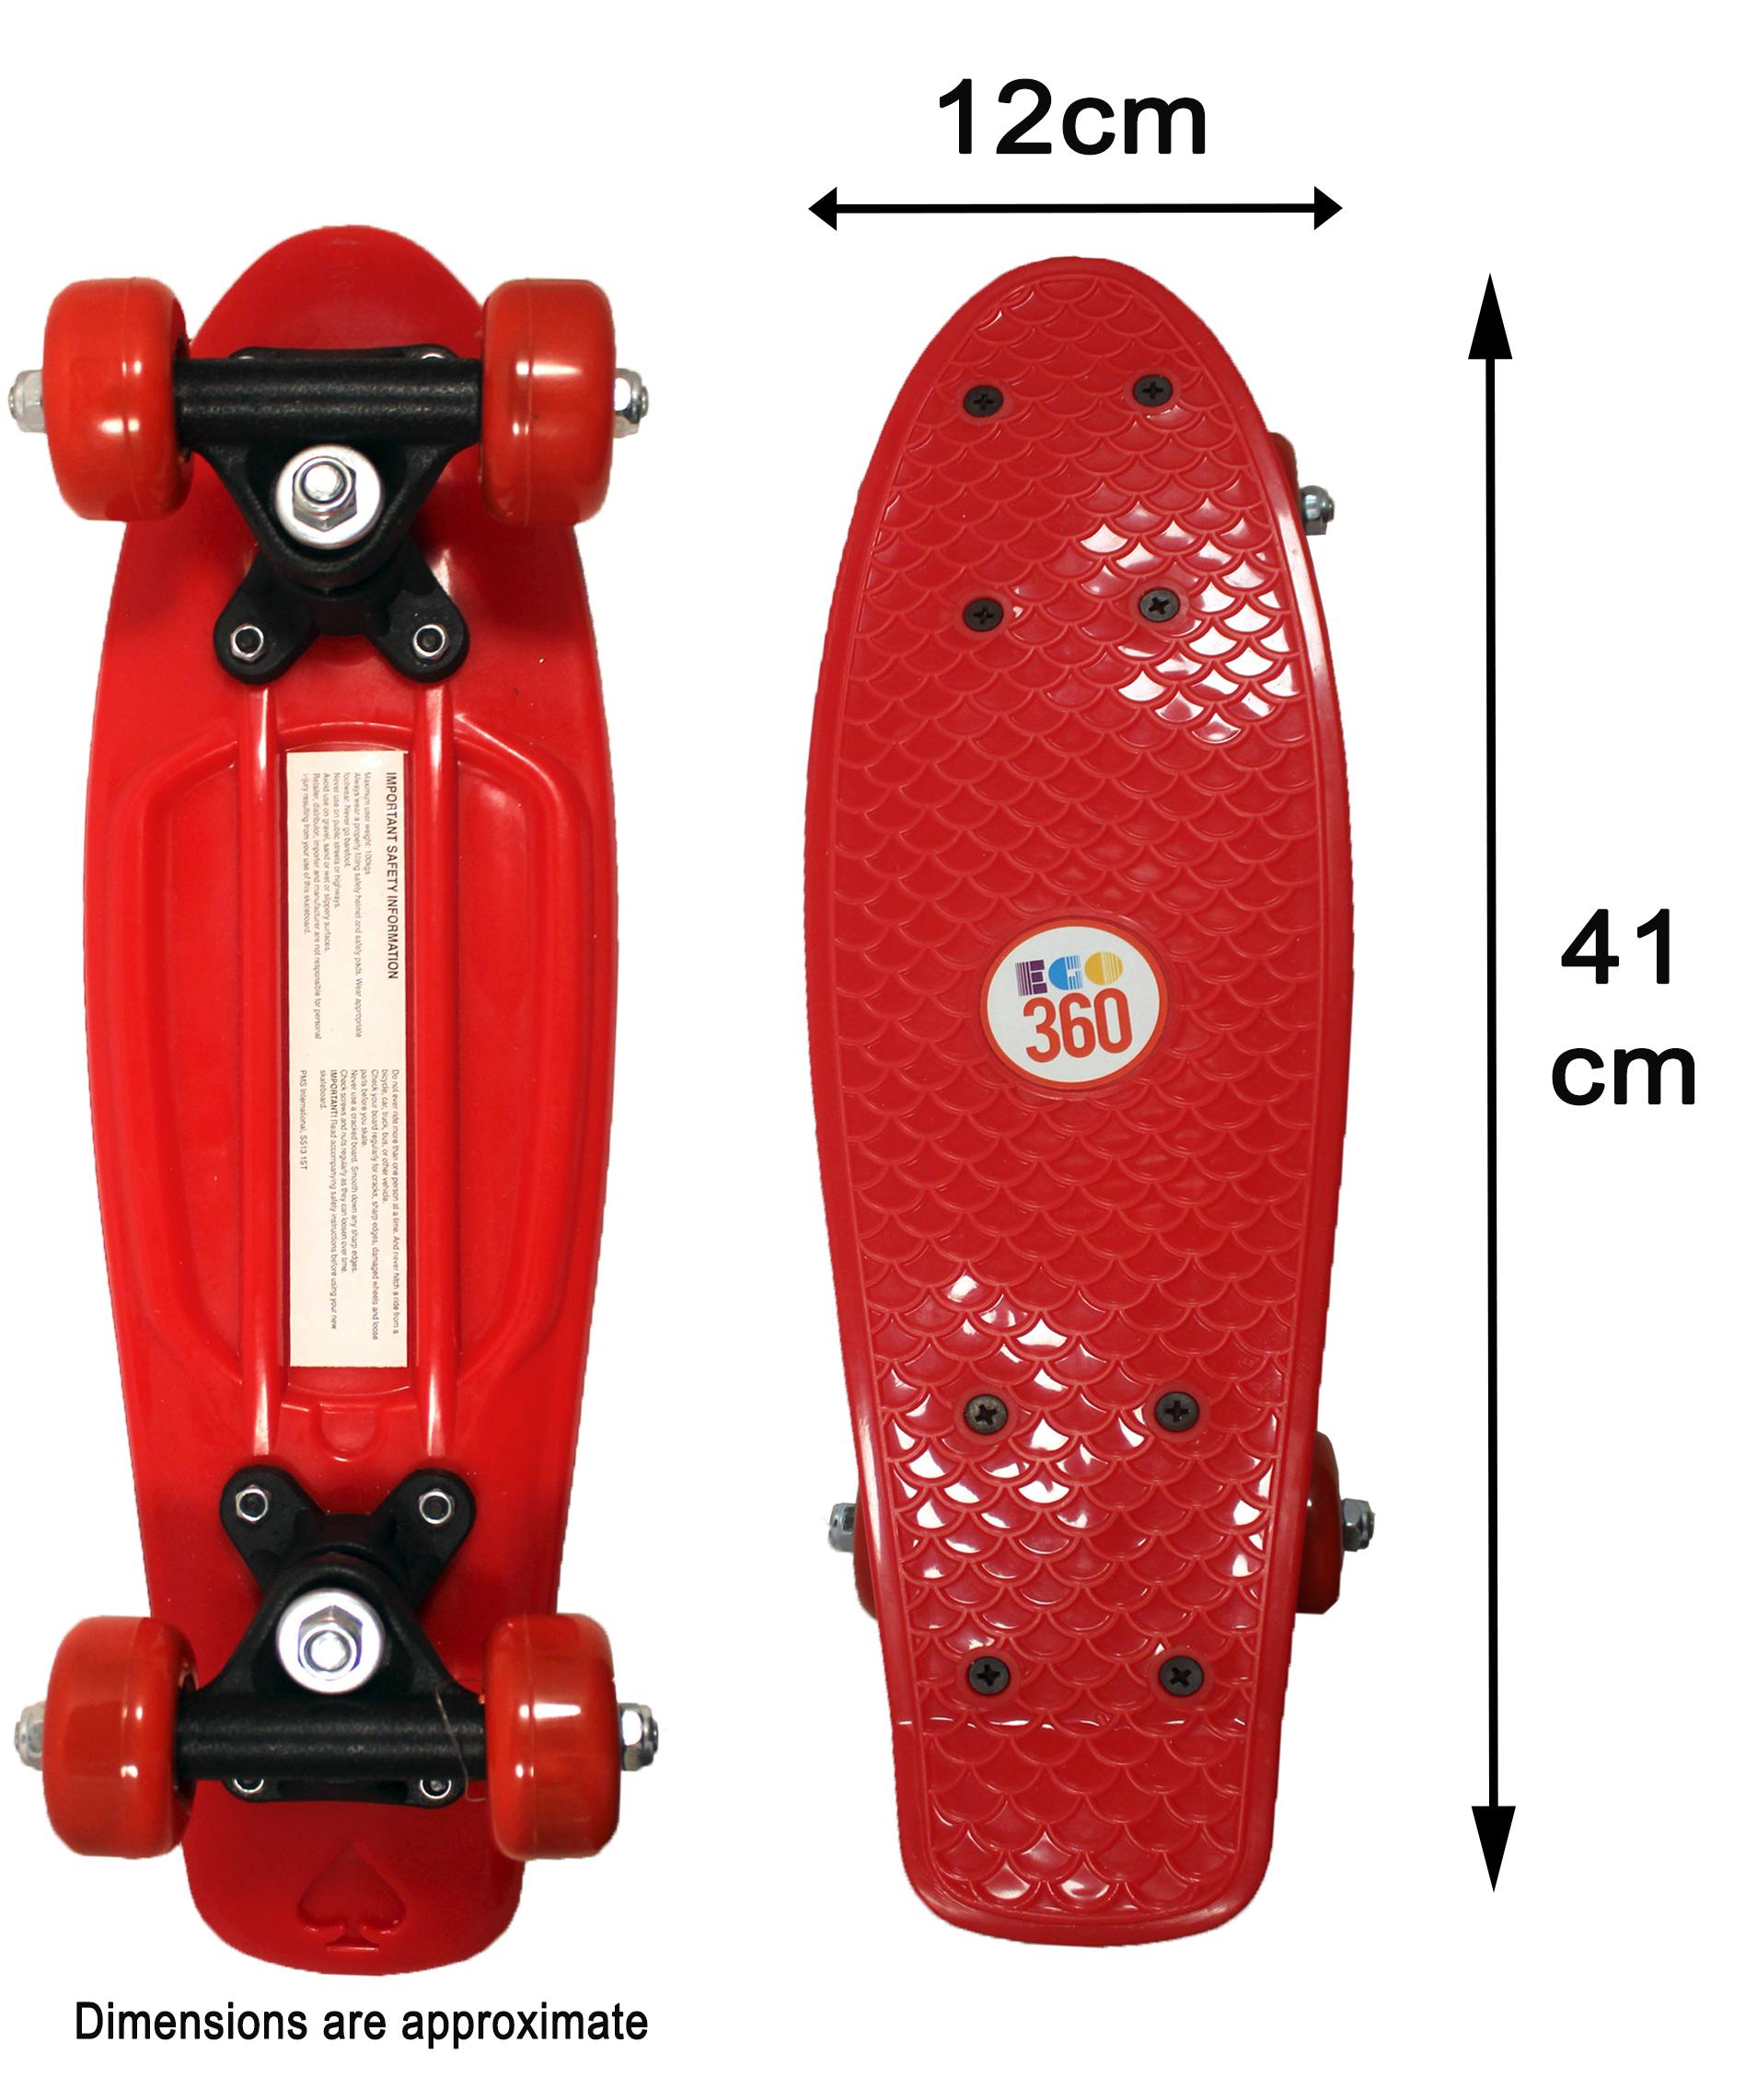 red mini cruiser skateboard with dimensions